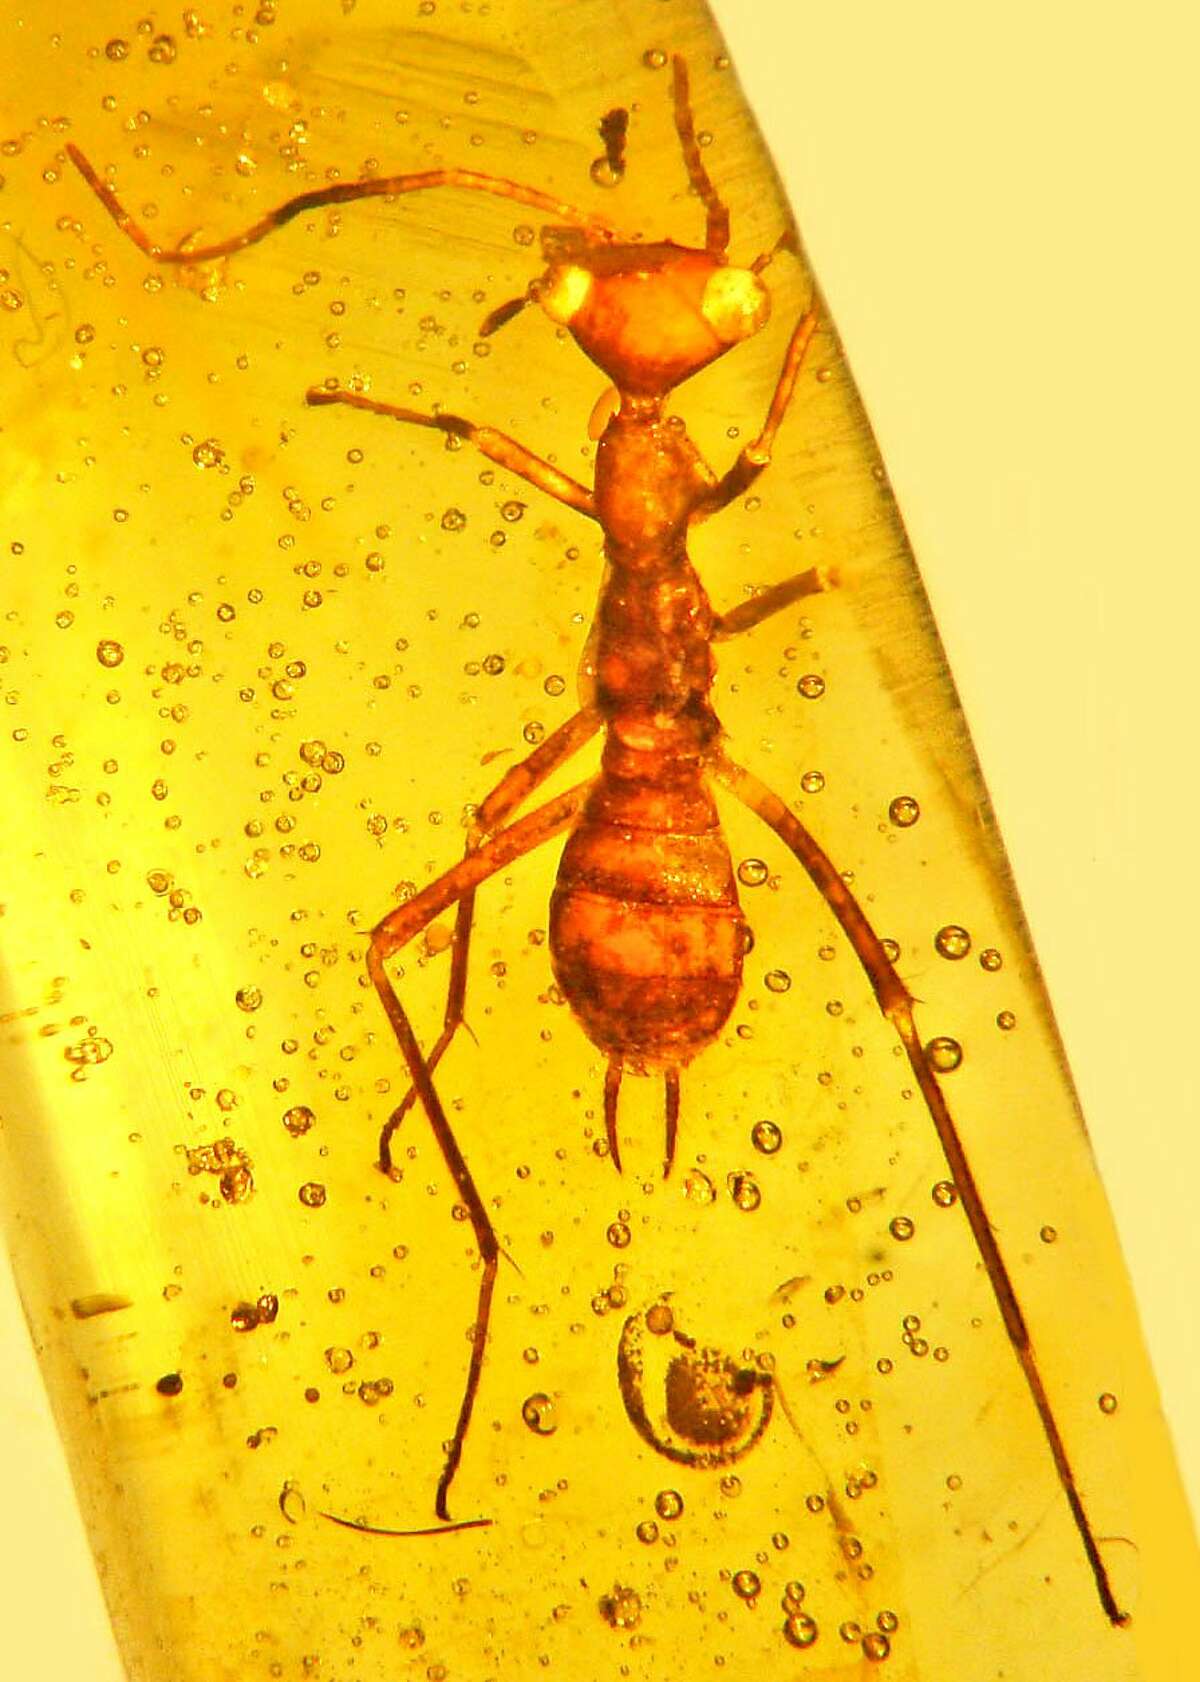 A mystery insect trapped in amber for 100 million years has caught the interest of scientists and the California Academy of Sciences in San Francisco.